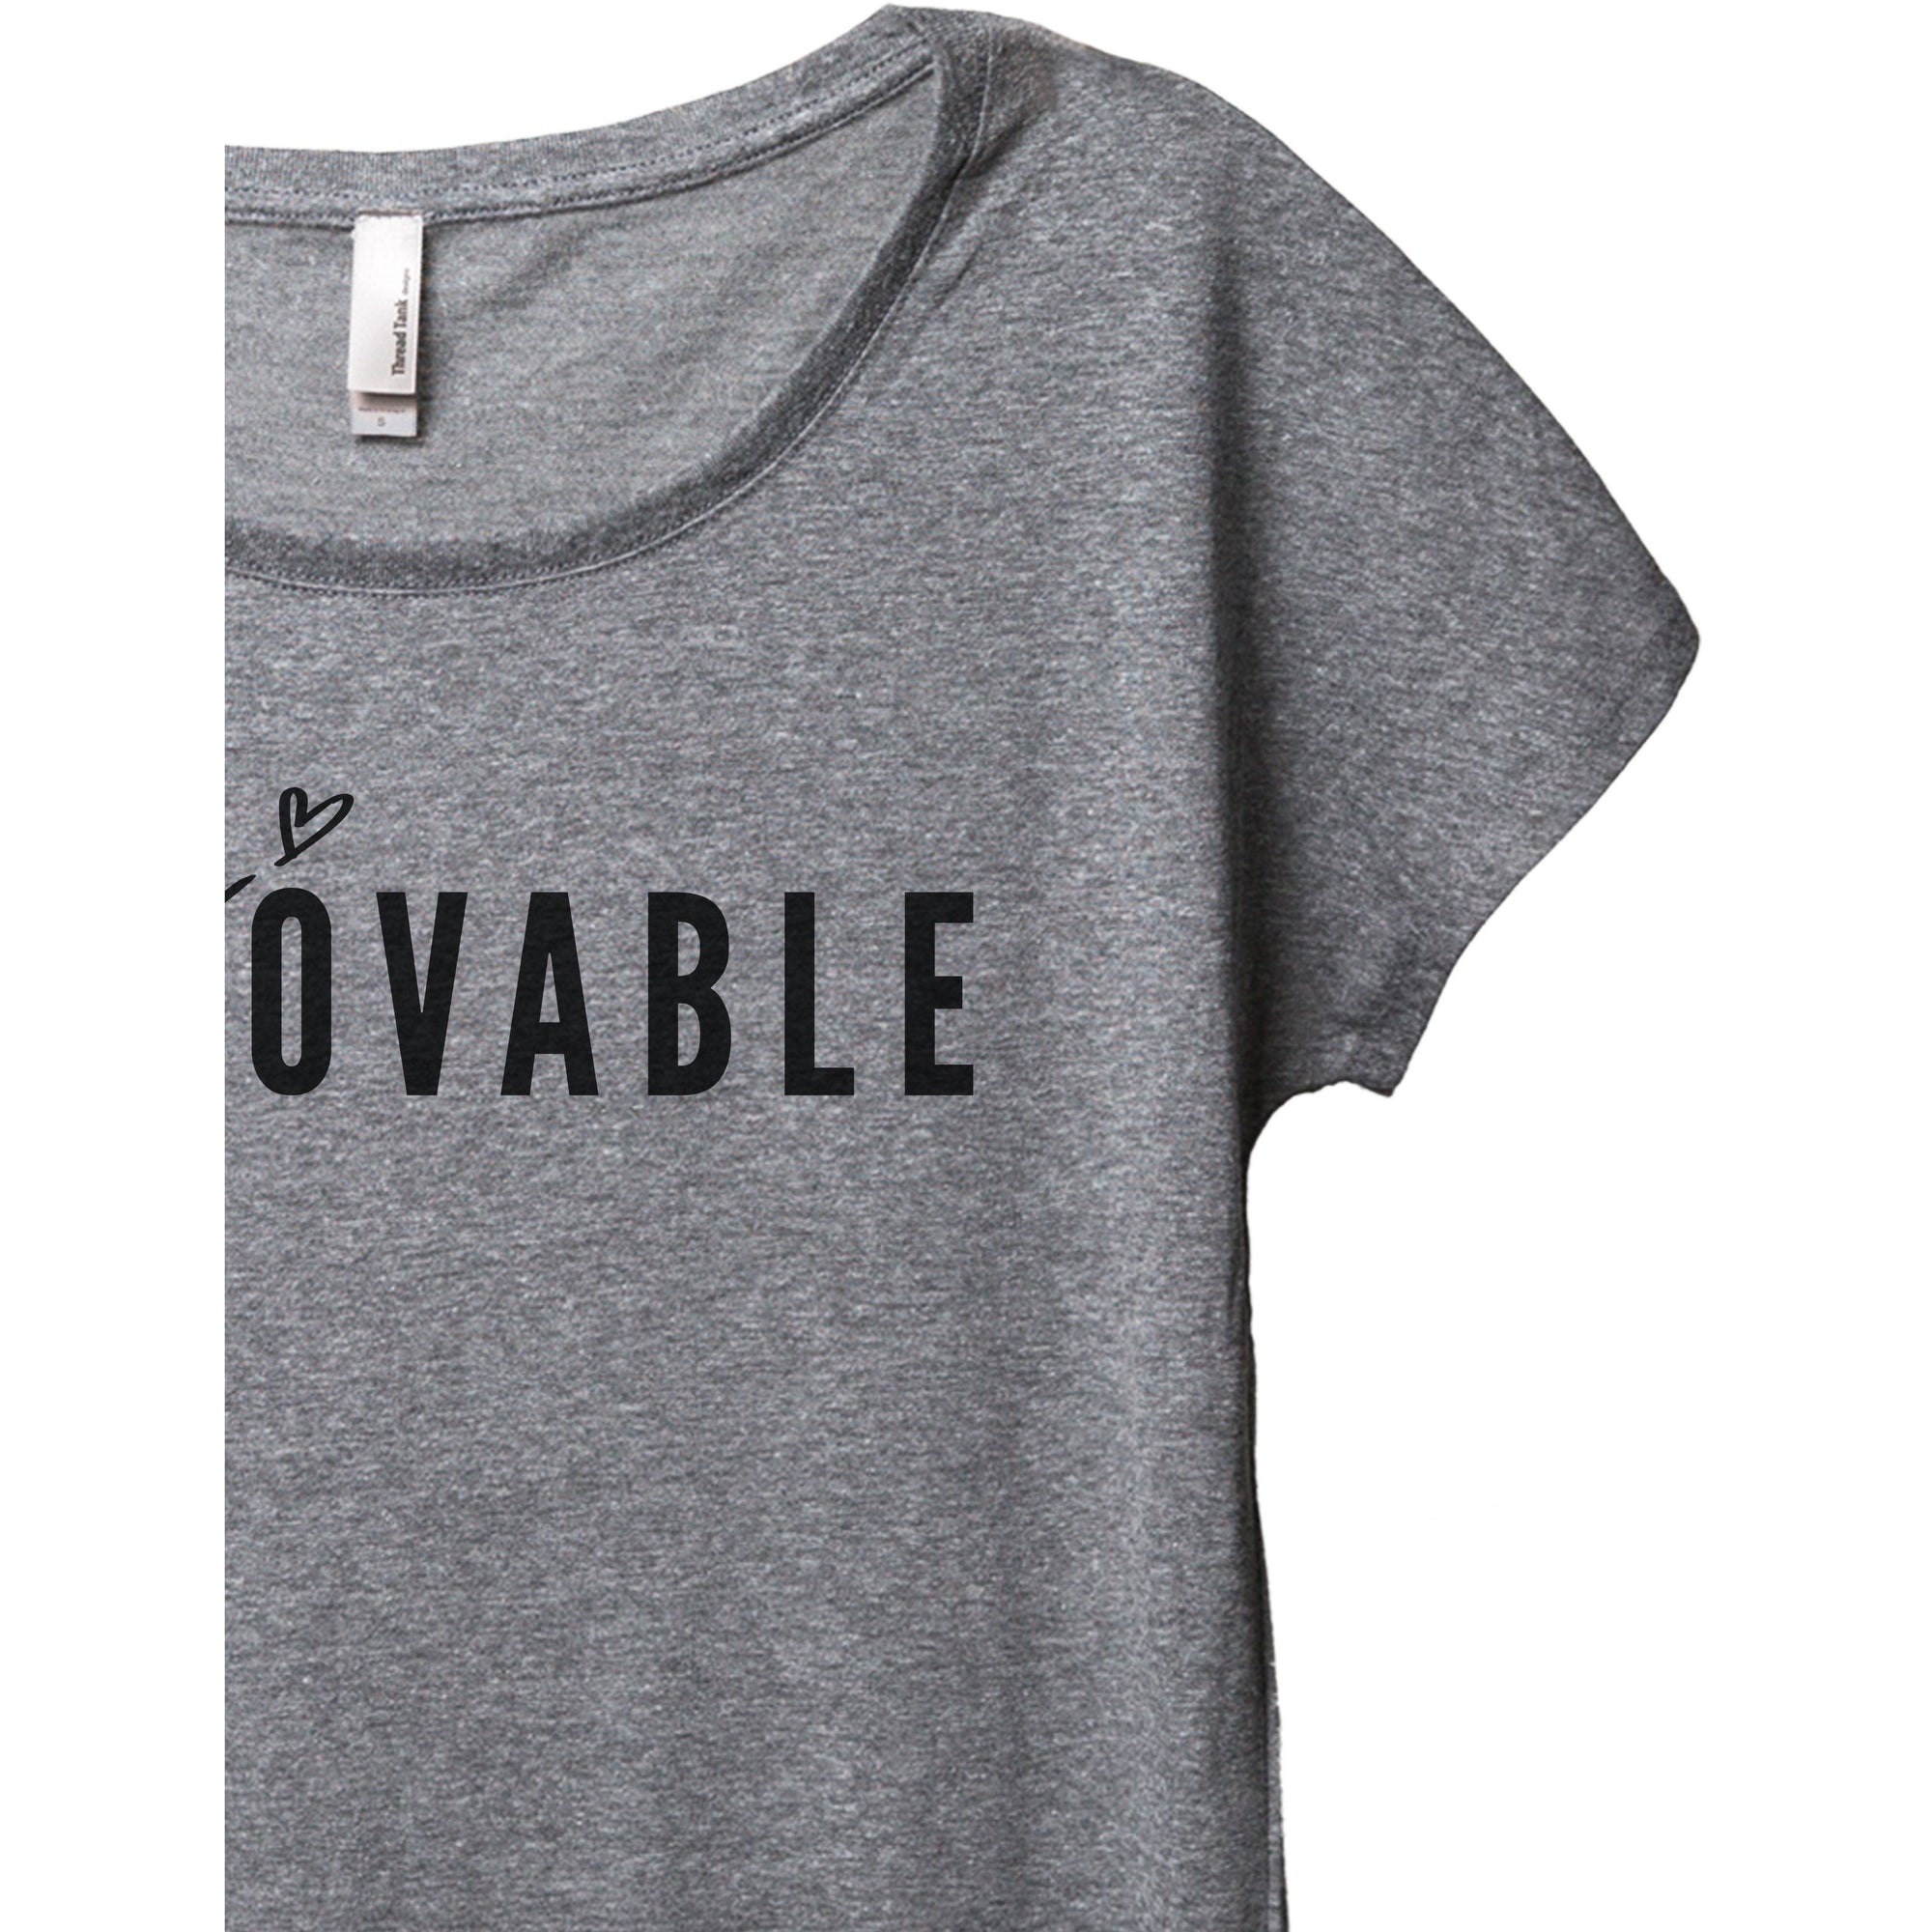 Lovable Women's Relaxed Slouchy Dolman T-Shirt Tee Heather Grey